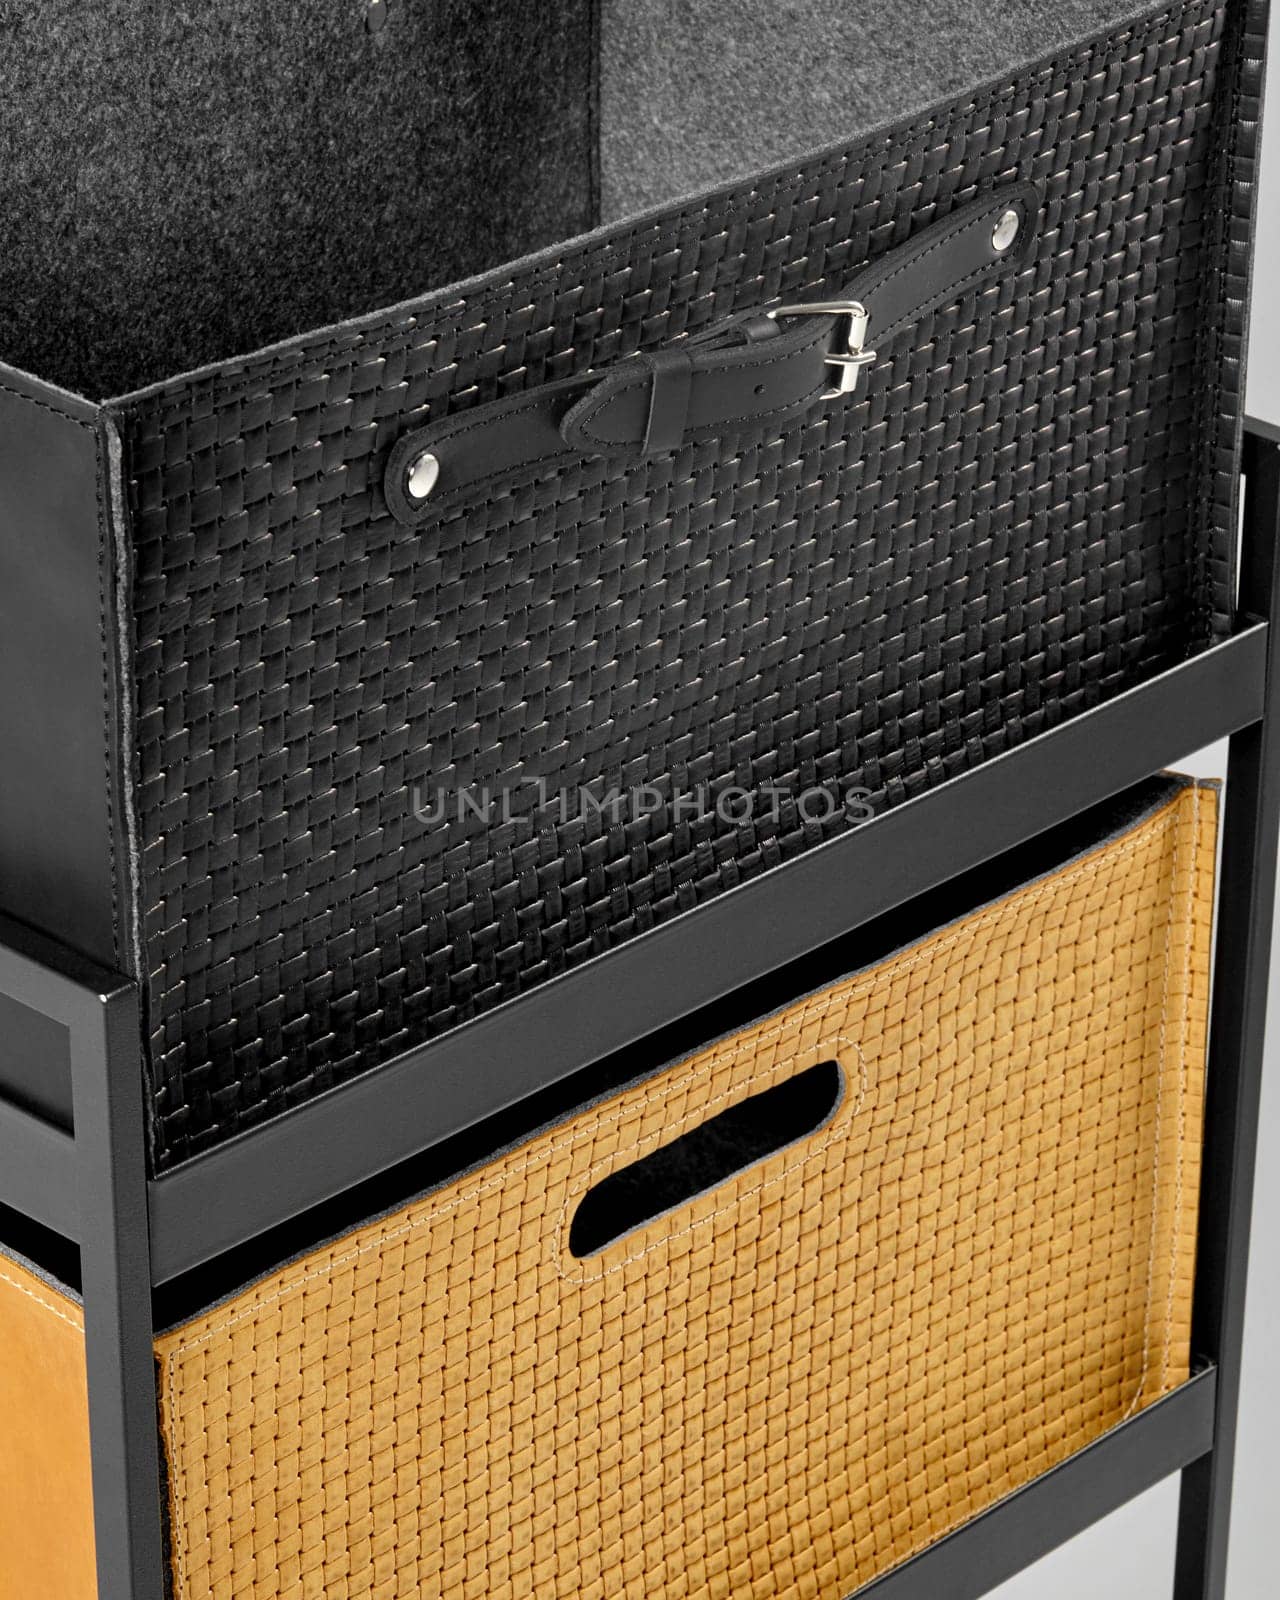 Closeup of black leather and tan suede storage woven boxes on metal shelf. Concept of elegant organization solutions for clutter-free and stylish home environment